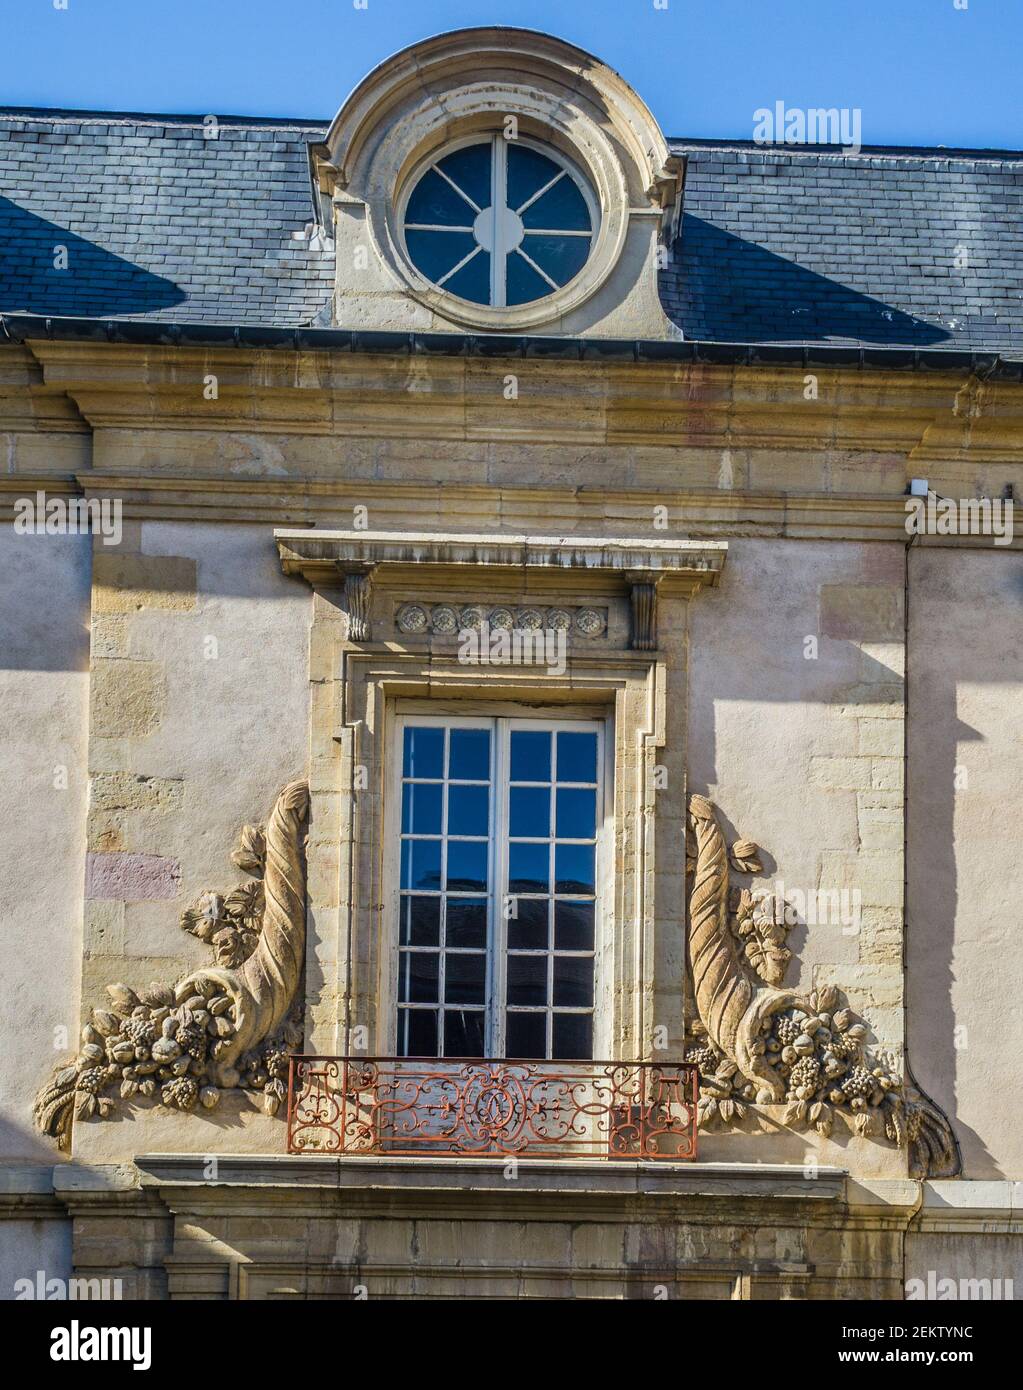 cornucopia adorned window at the east facade of the Palace of the Dukes in Dijon, Côte-d'Or department, Bourgogne-France-Comté region, France Stock Photo